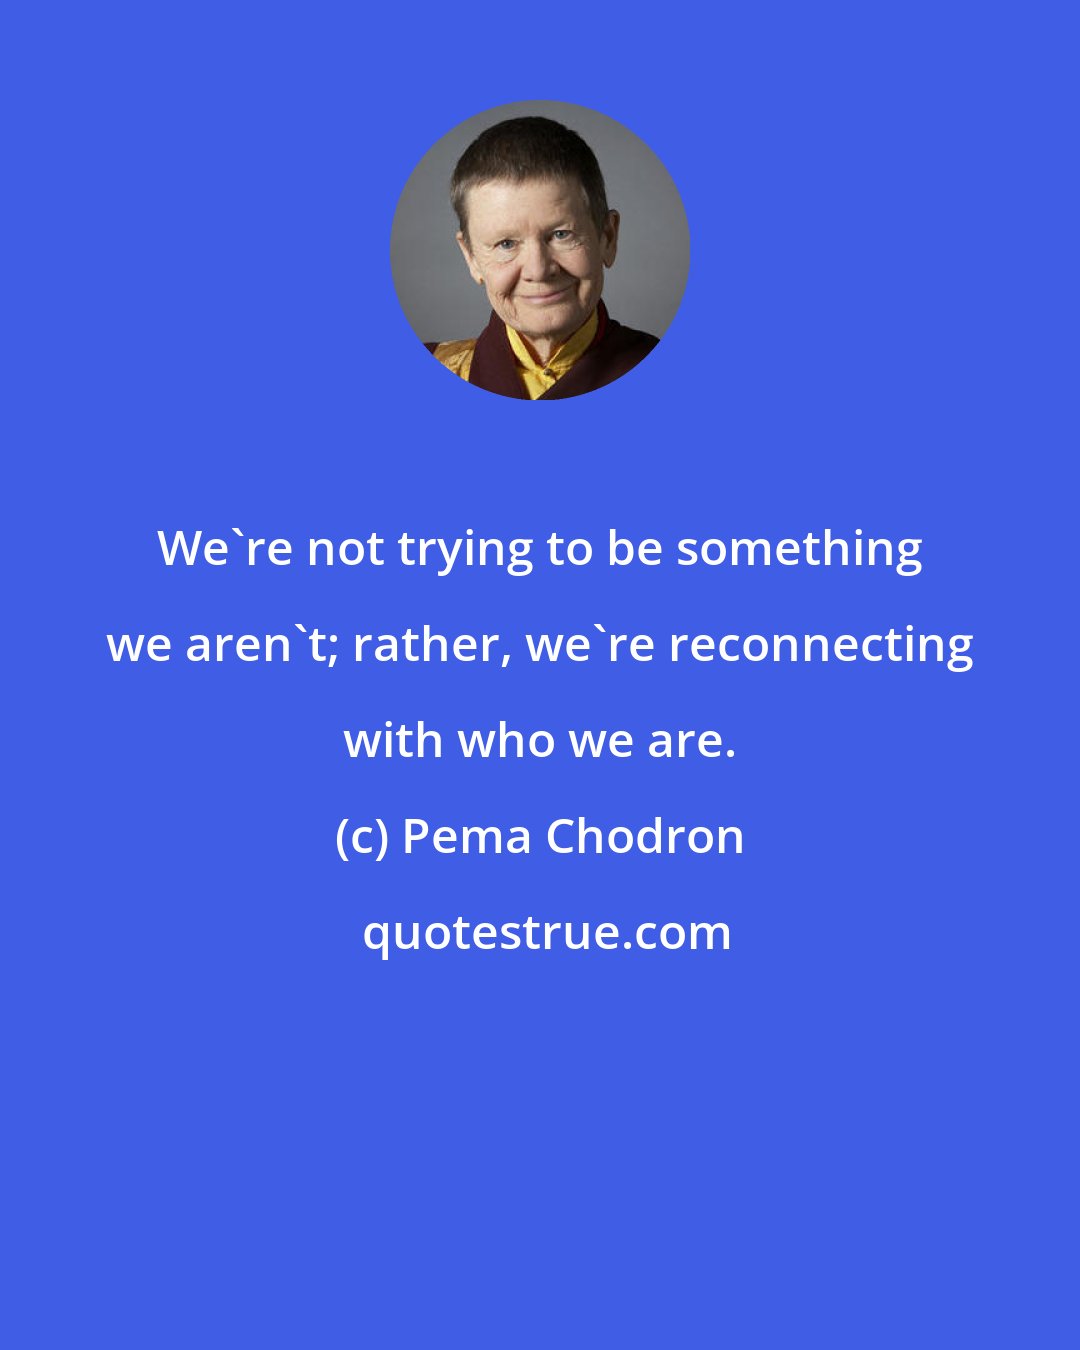 Pema Chodron: We're not trying to be something we aren't; rather, we're reconnecting with who we are.